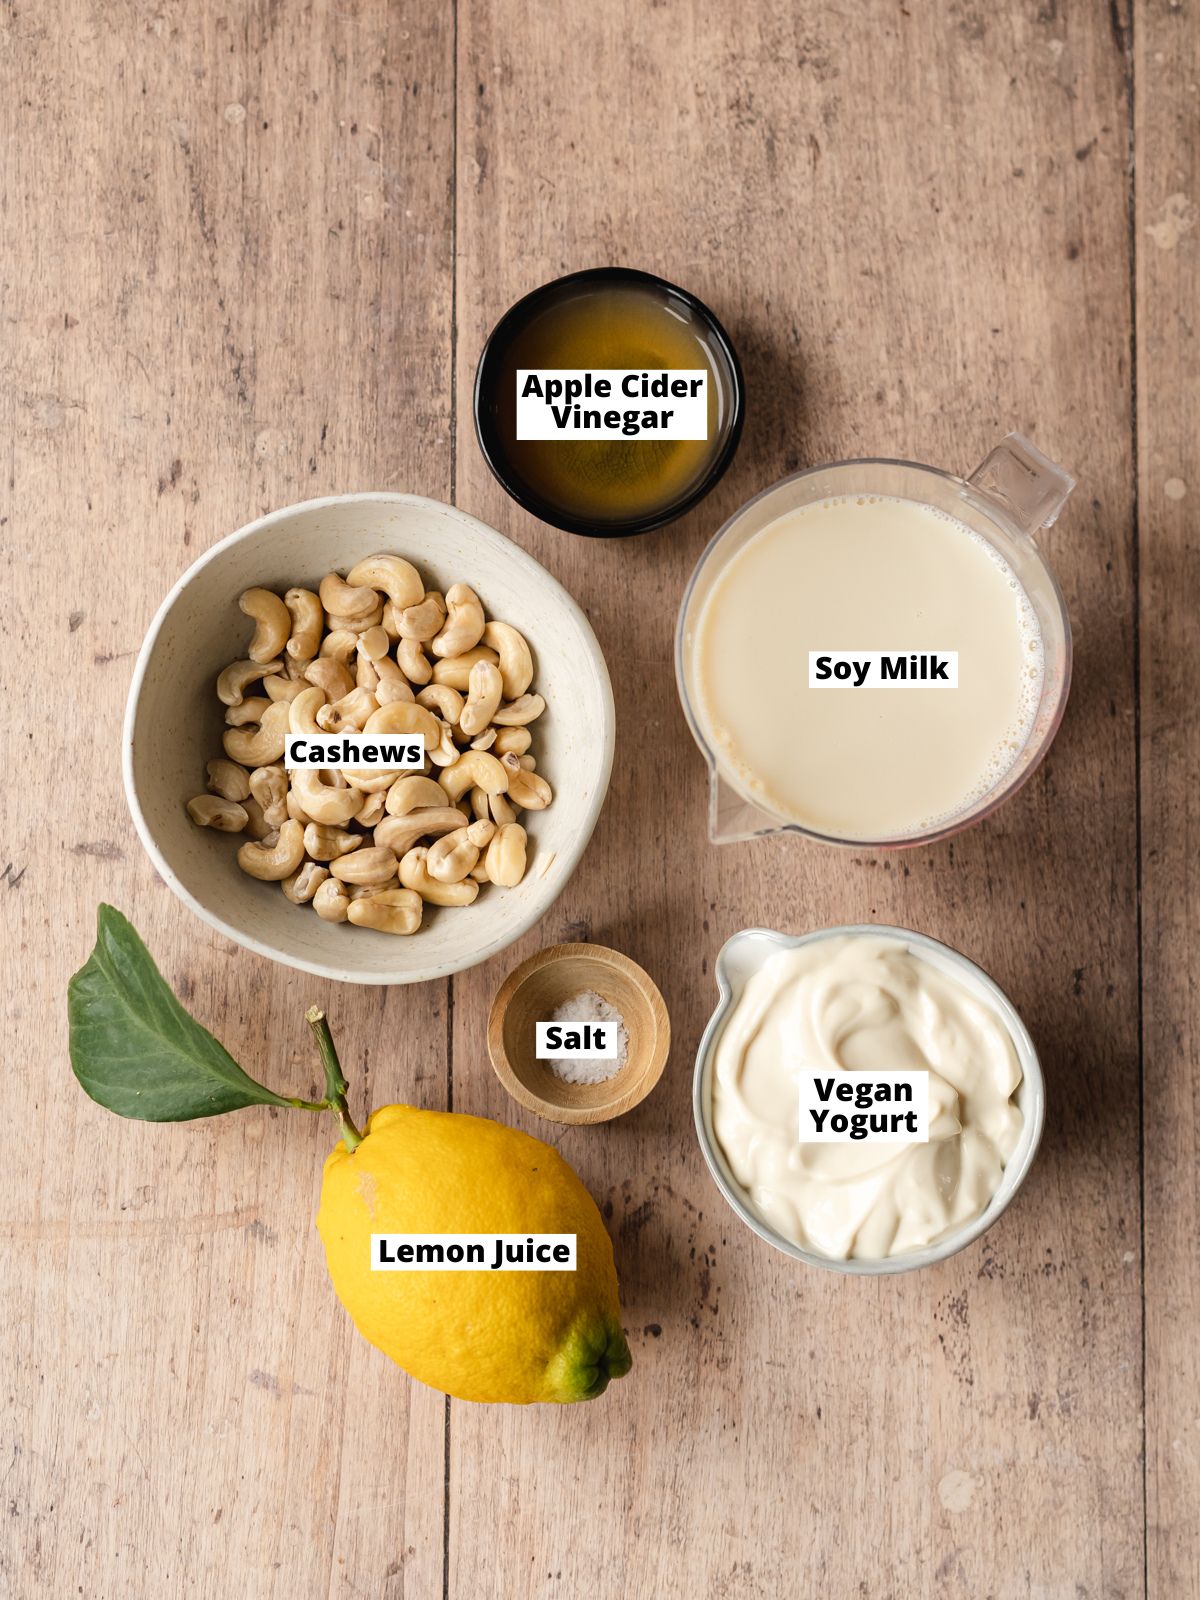 ingredients to make vegan ricotta cheese measured out in bowls on a wooden surface.